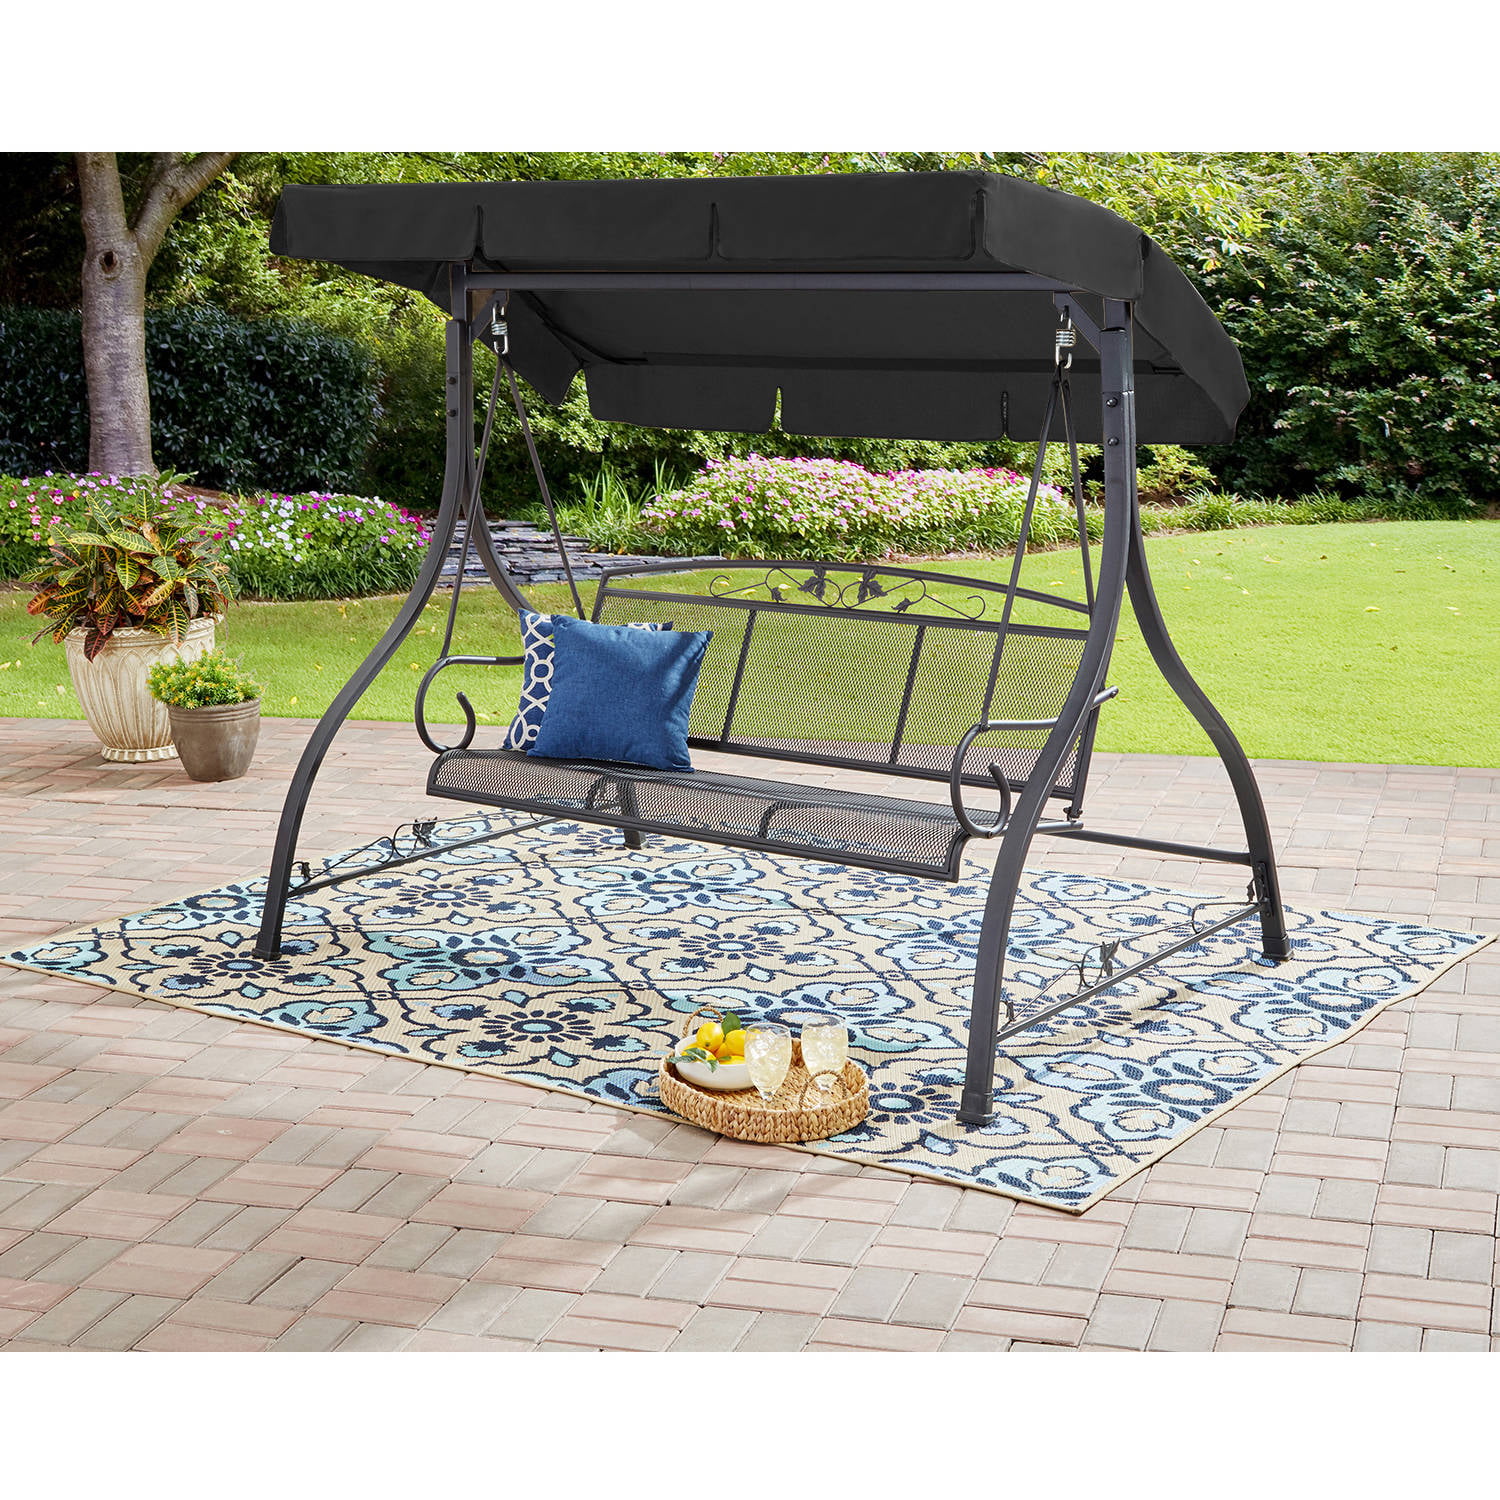 Mainstays* Classic Outdoor 3-Person Sling Canopy Porch Swing